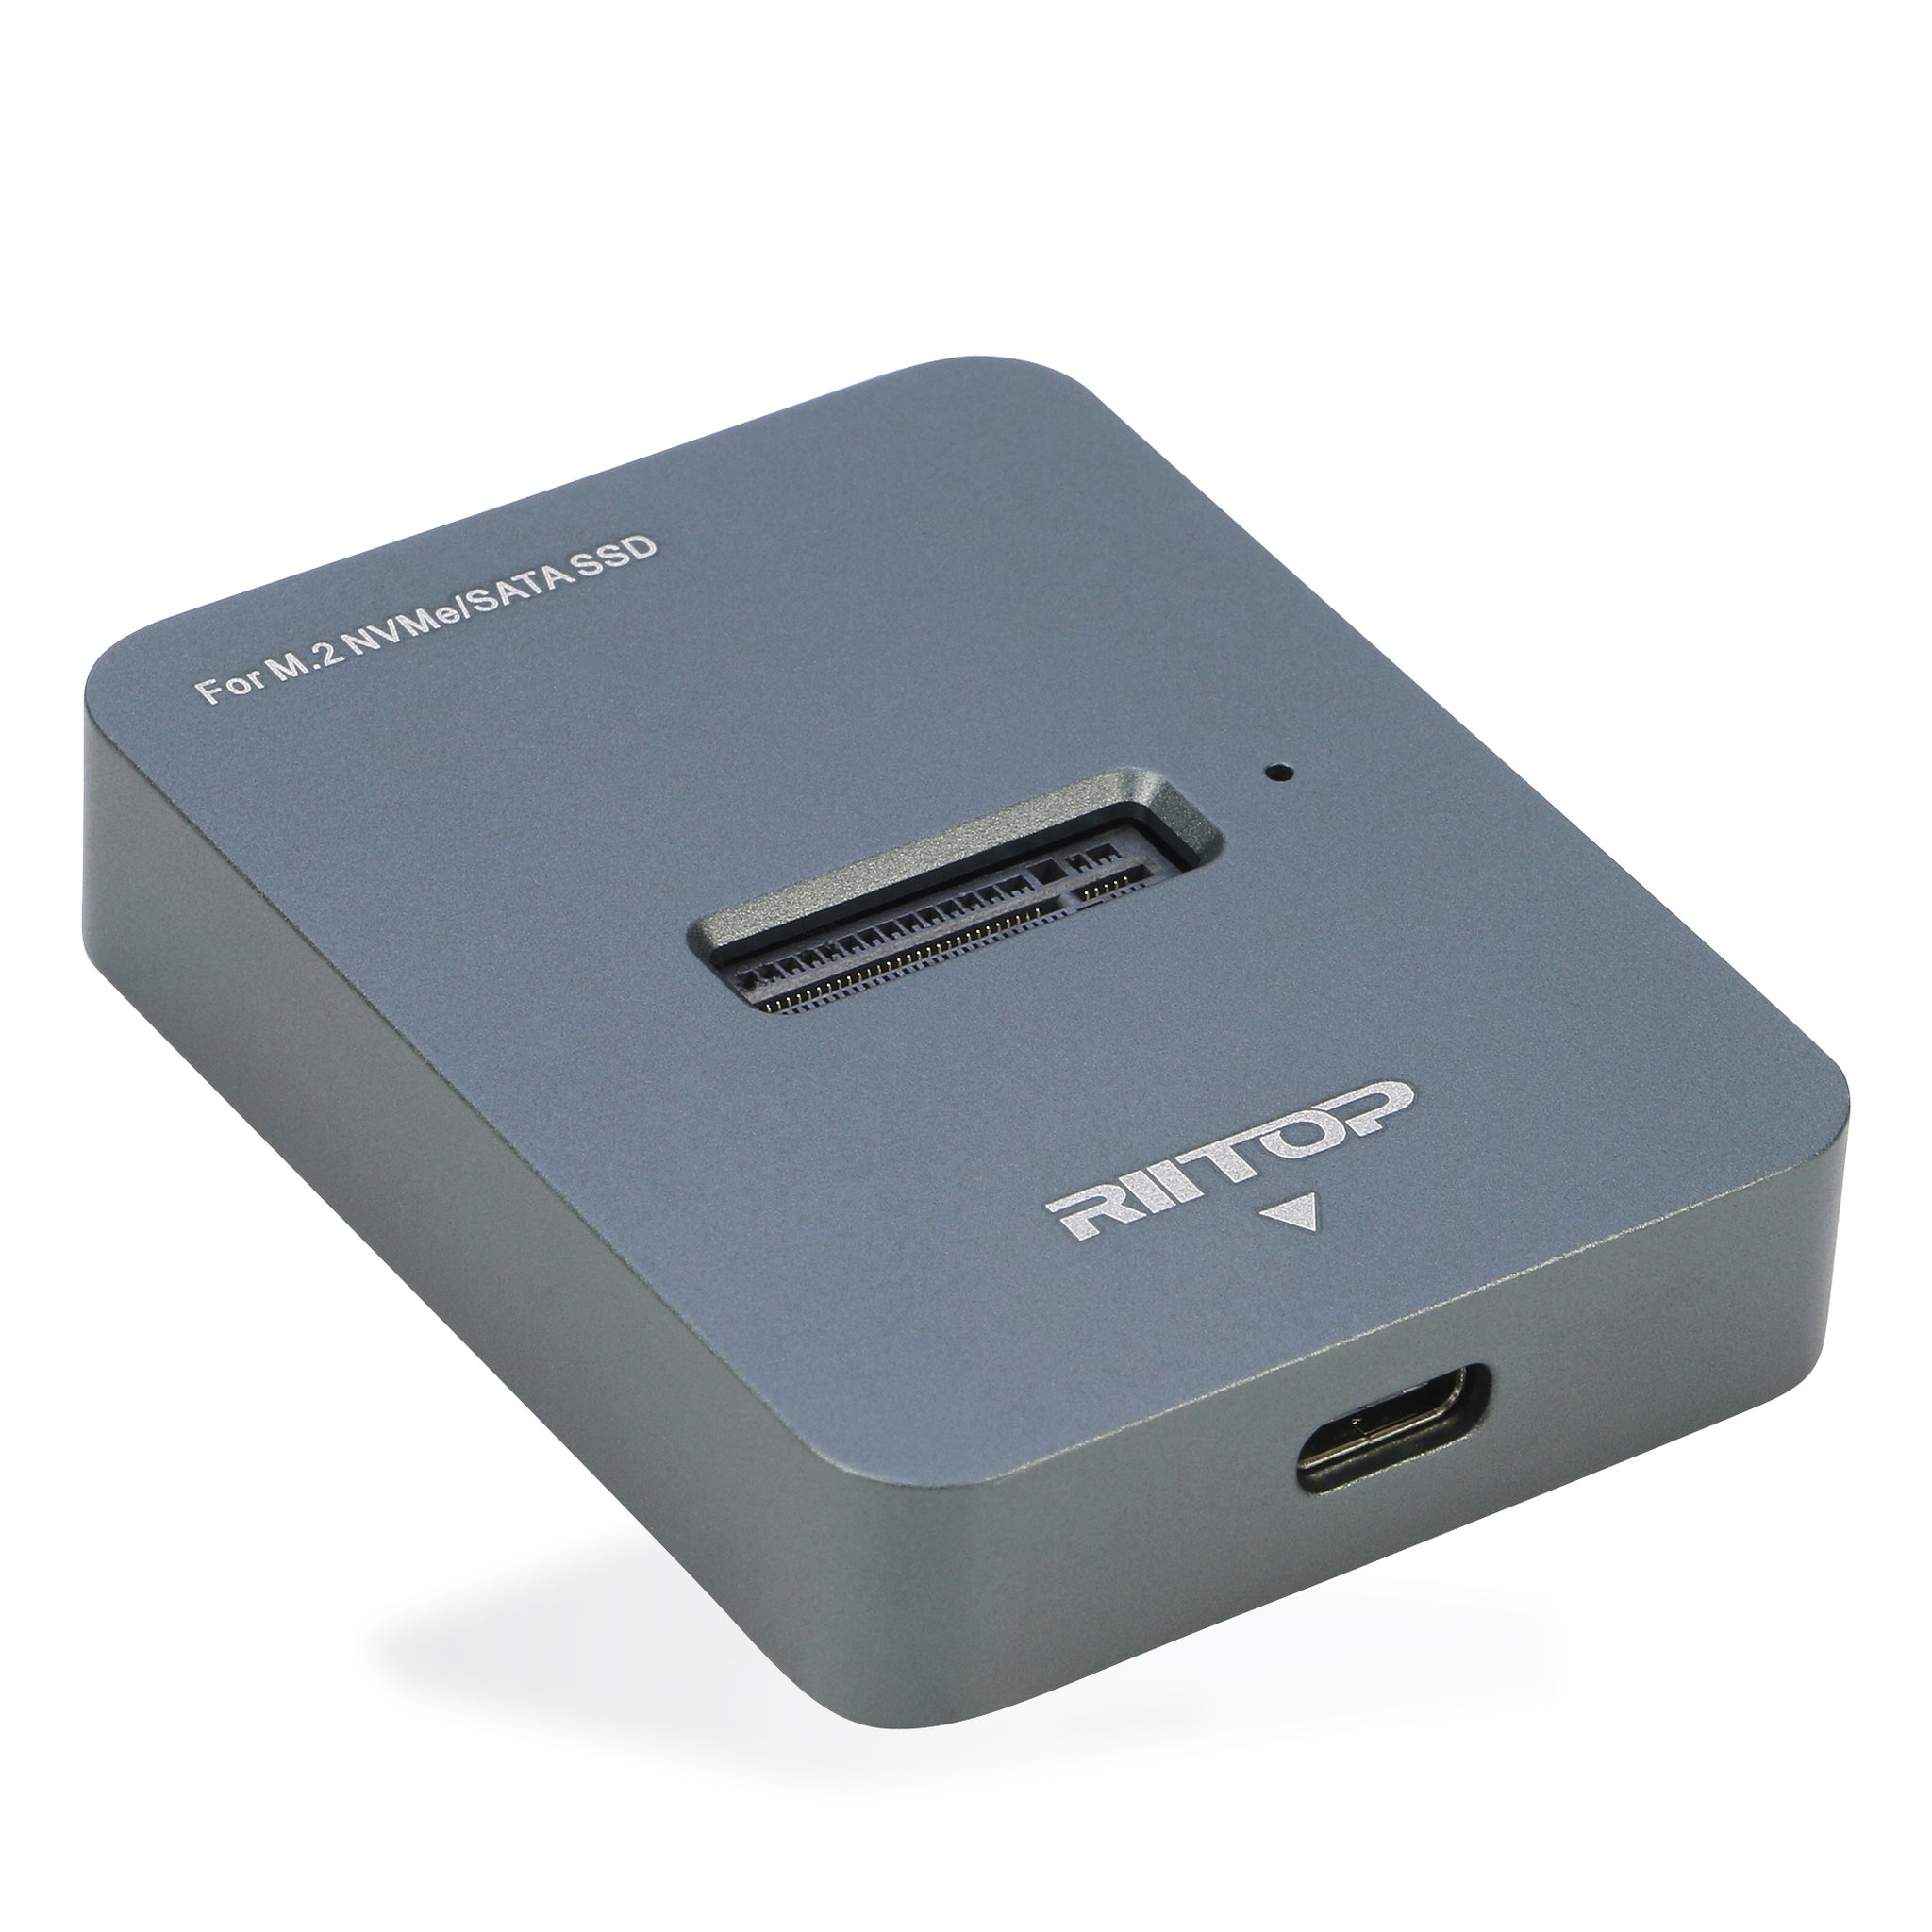 M.2 to USB Docking Station, RIITOP M.2 SSD to USB-C Reader Adapter for